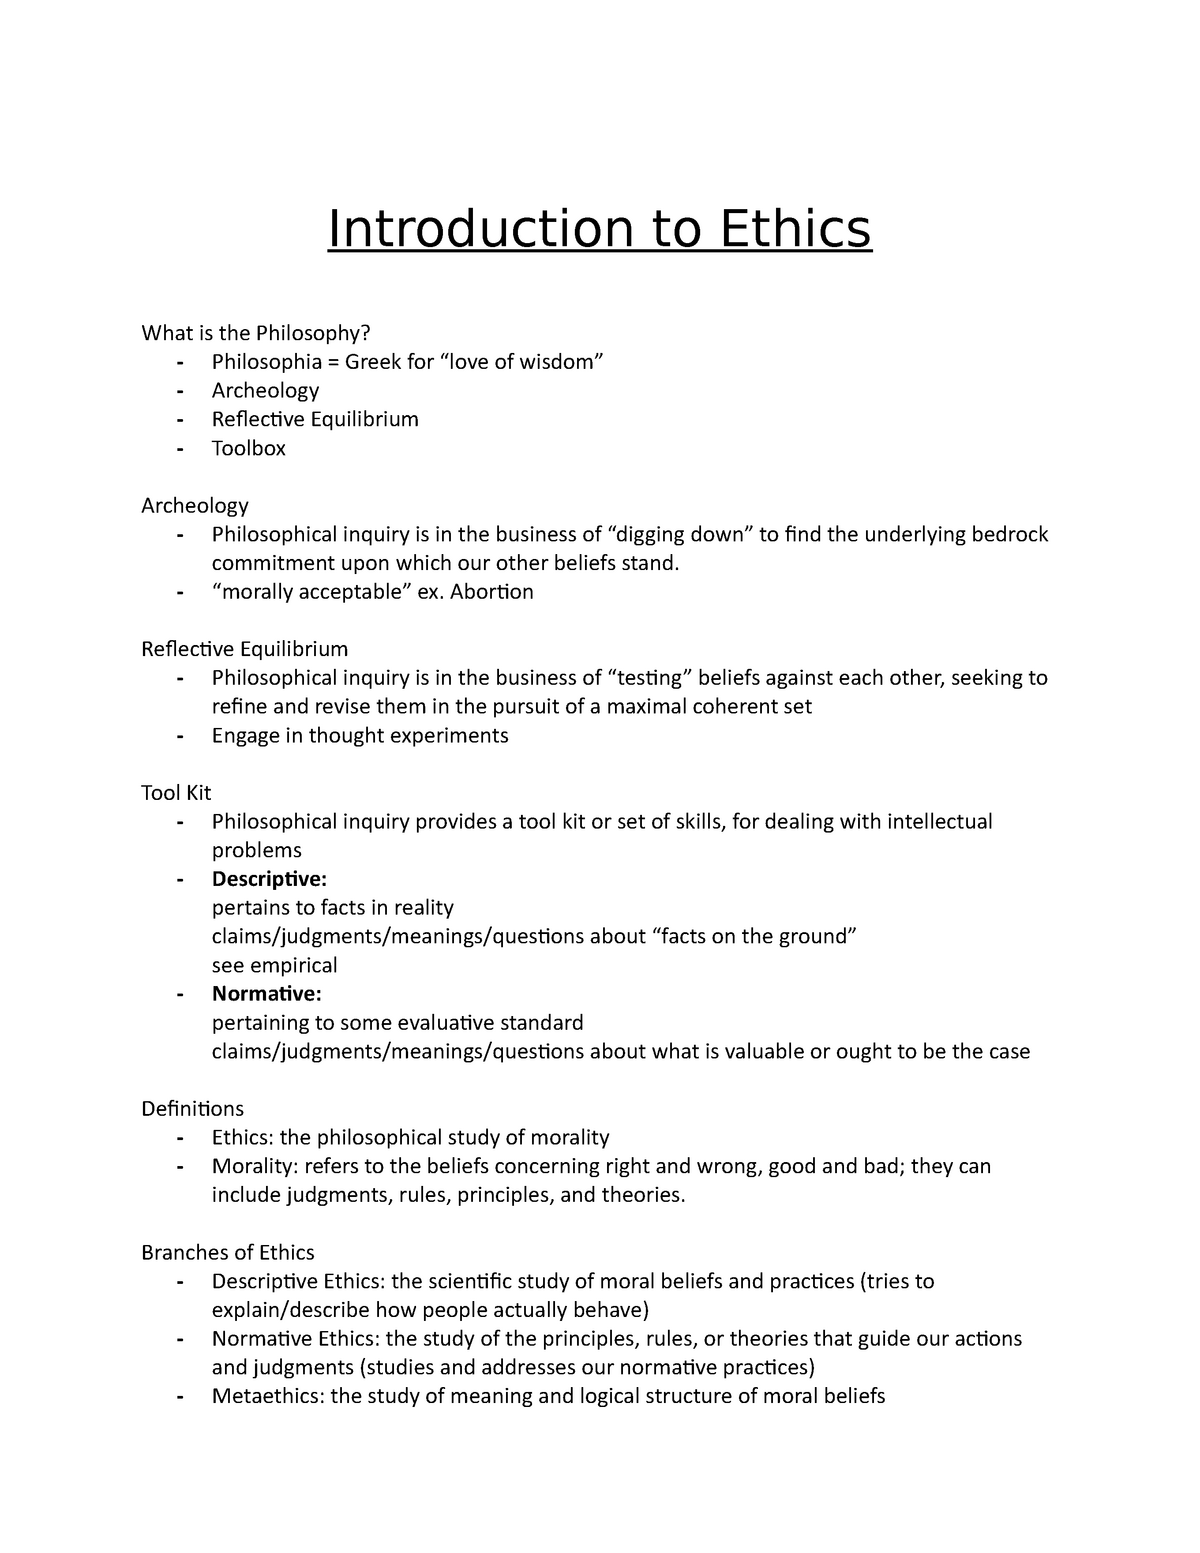 introduction on ethics essay